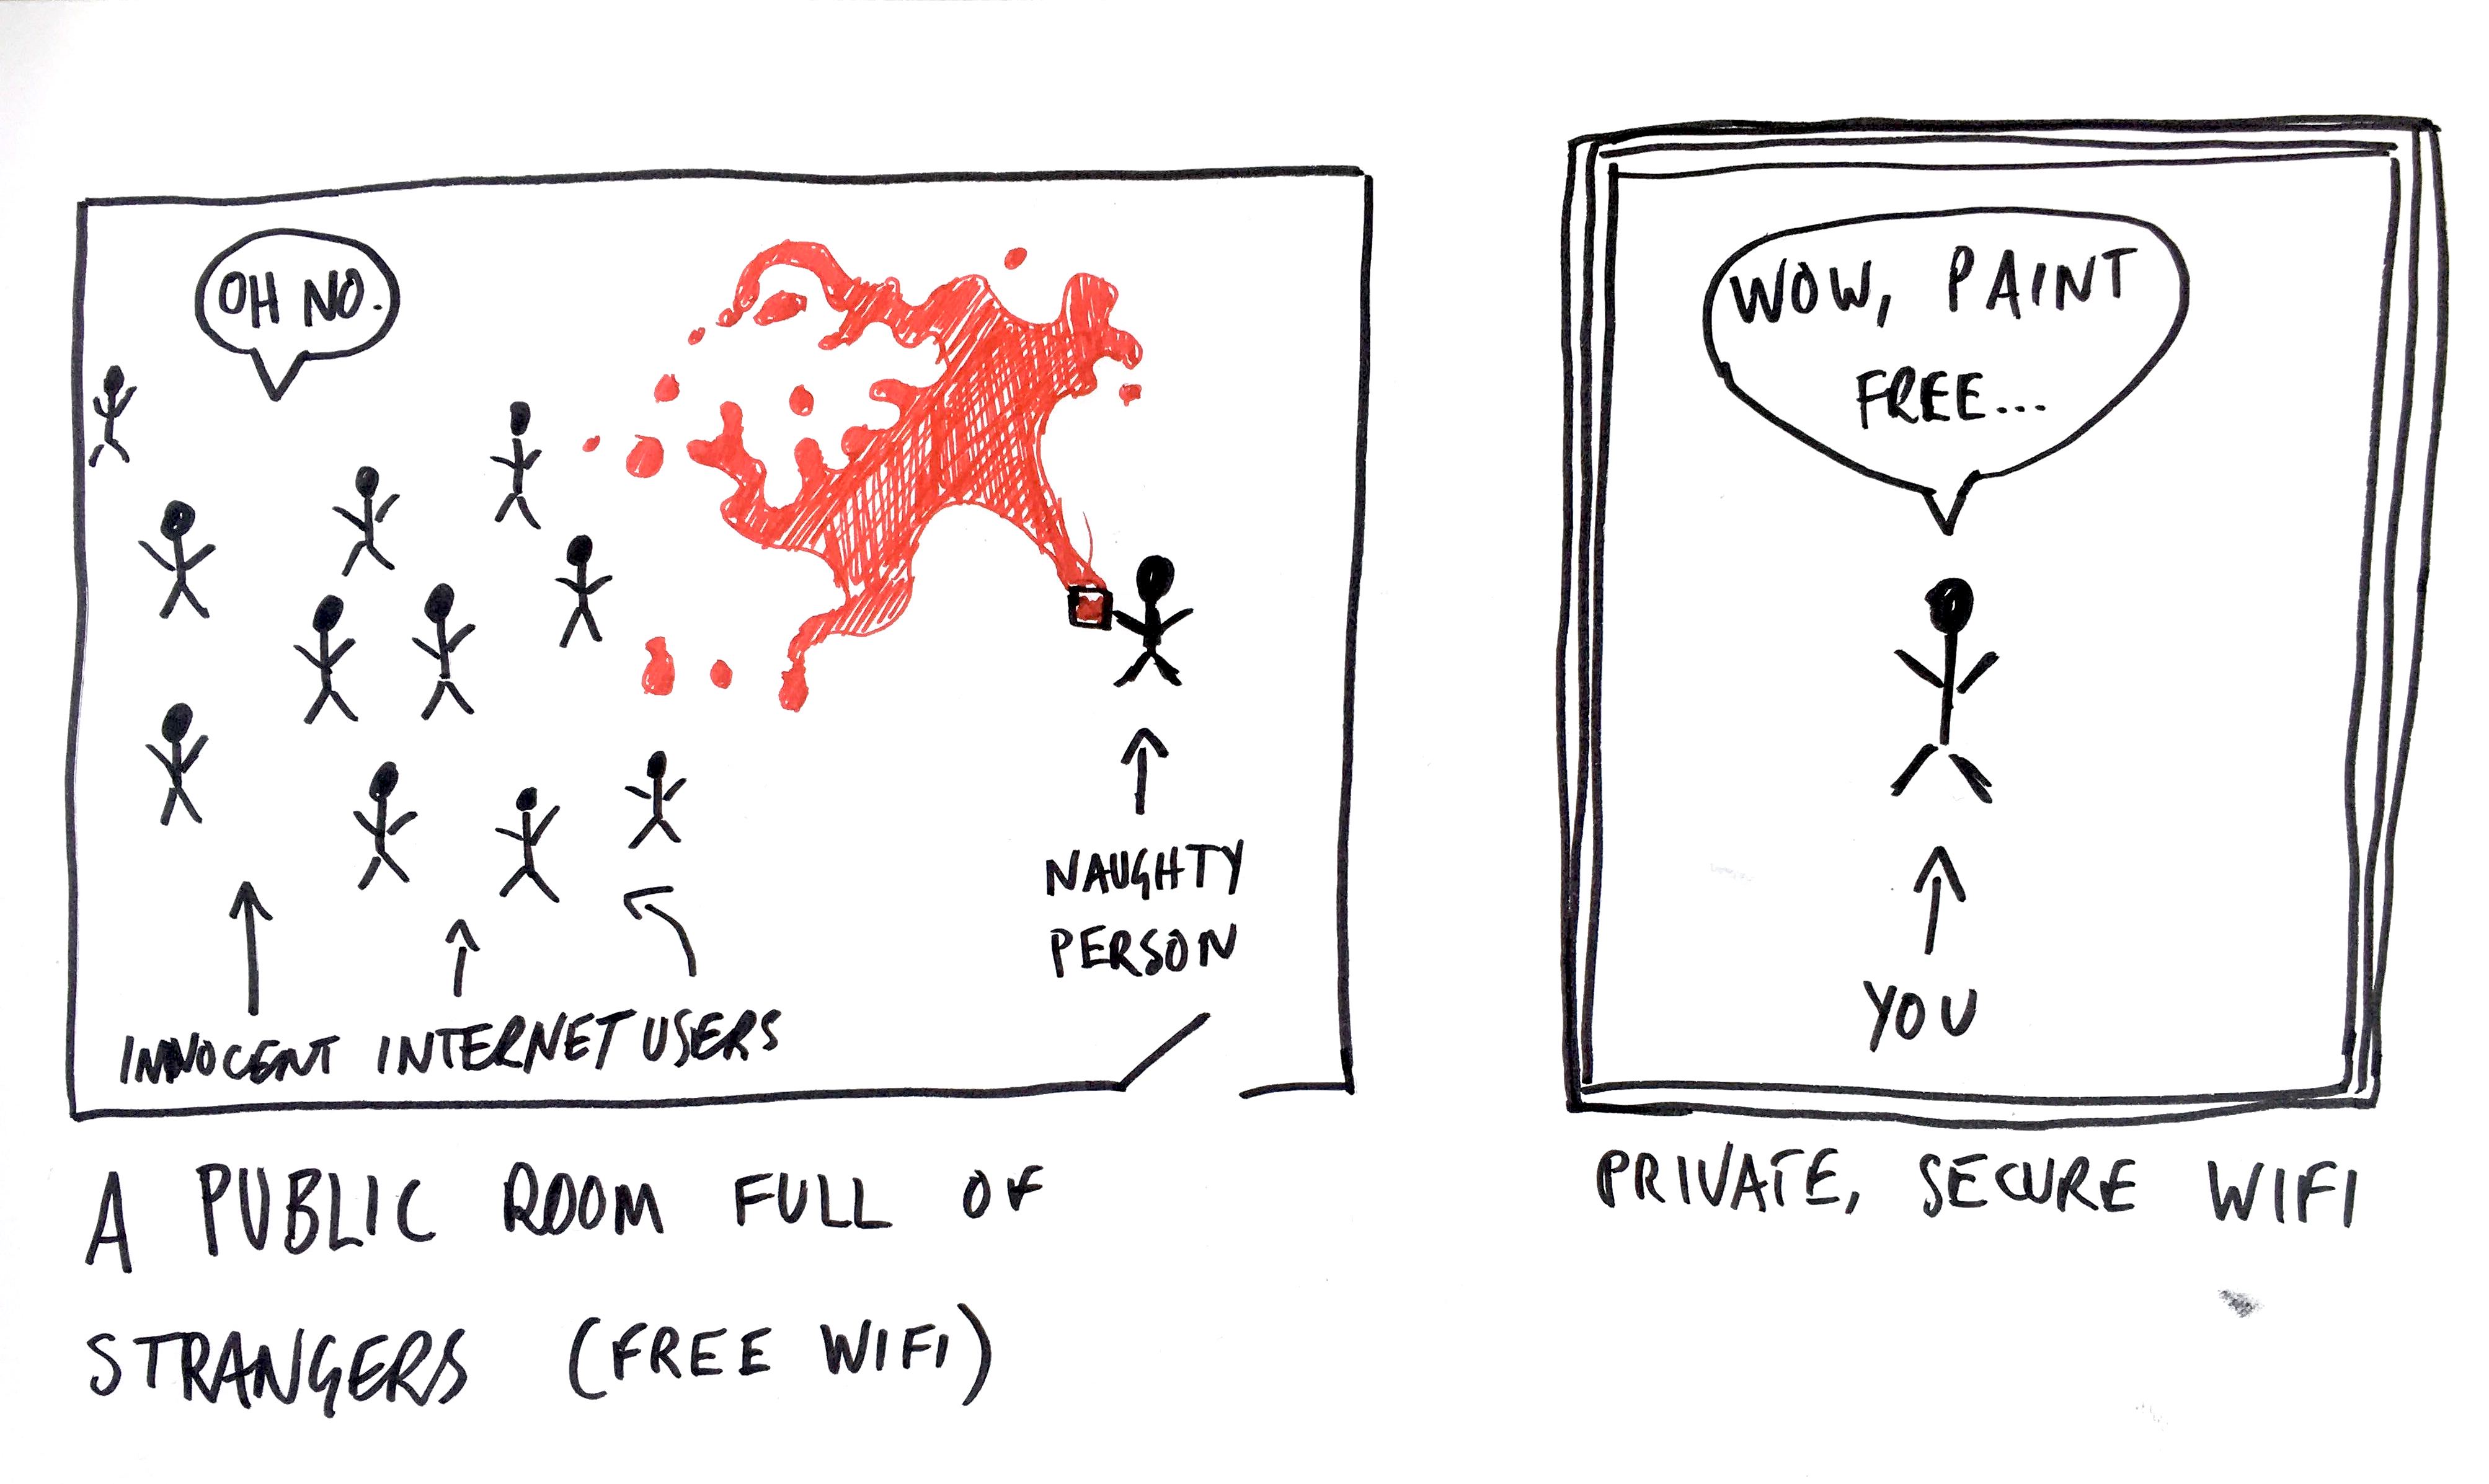 Illustration differenciating public and private wifi